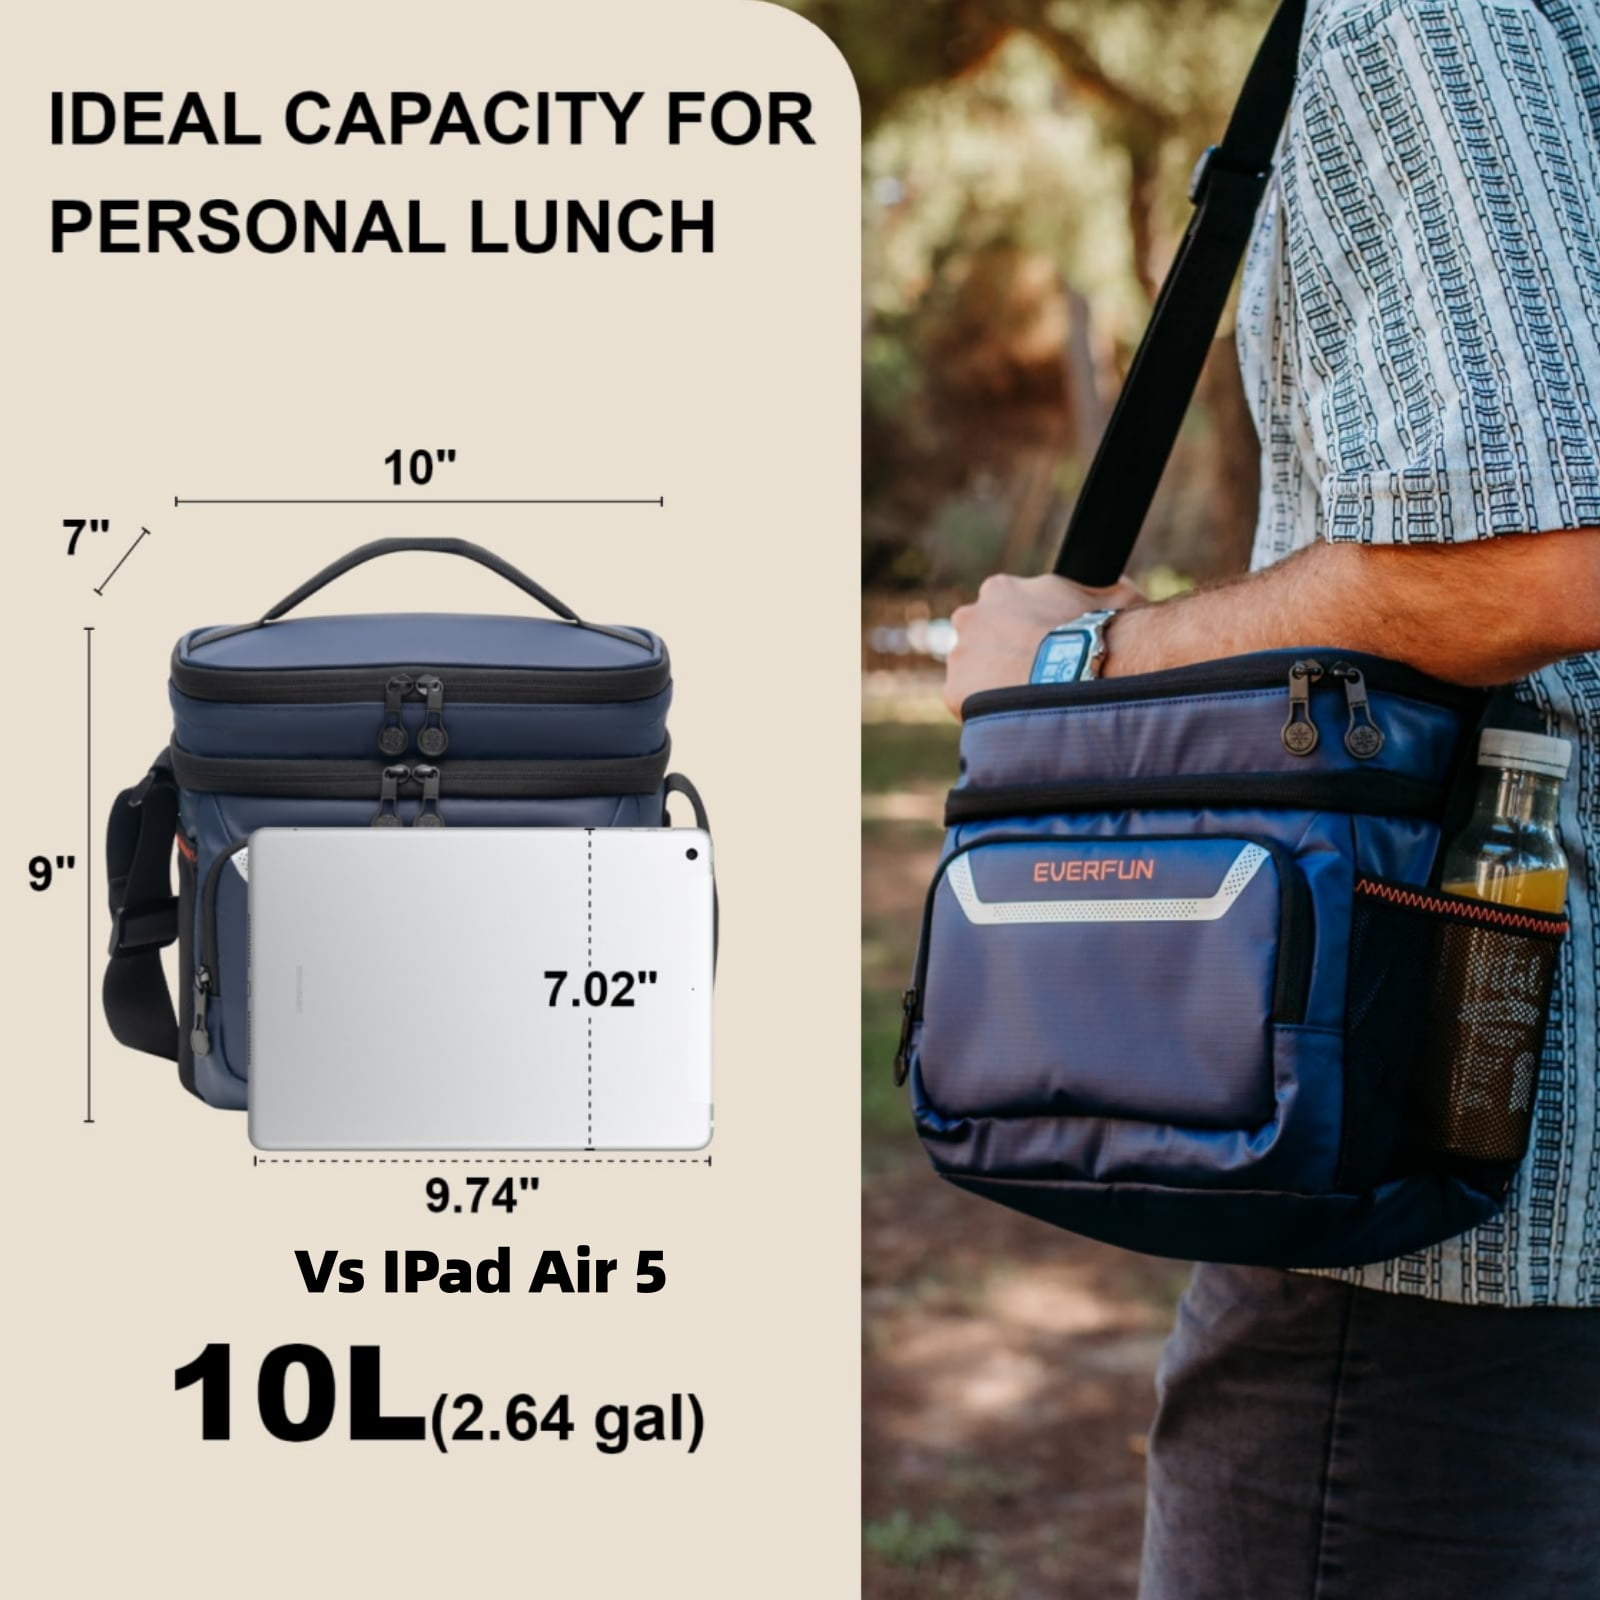 Yinrunx Cooler Bag Lunch Bag Coolers Small Cooler Bag Ice Chest Soft Cooler  Beach Cooler Yeti Cooler Bag Insulated Bag Car Cooler Coolers on Wheels  Cooler Bag Insulated Waterproof Ice Chests 